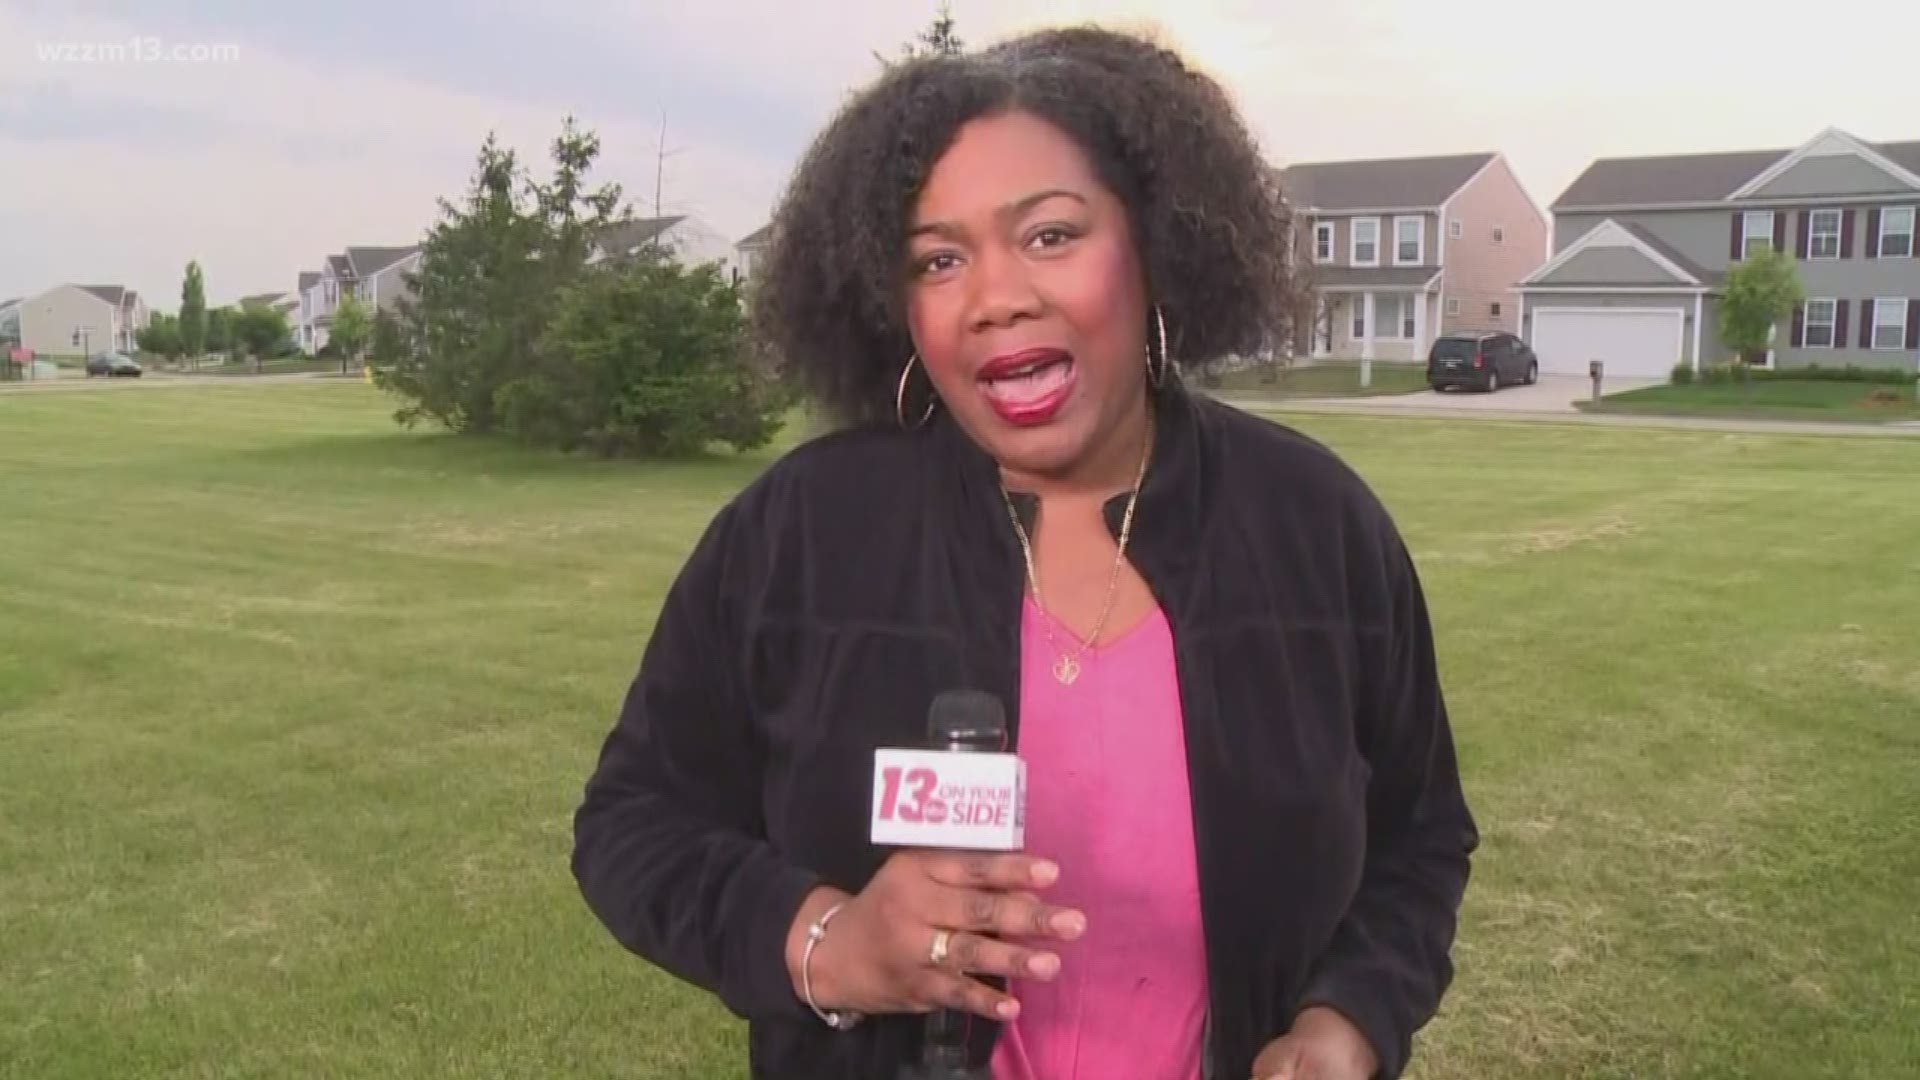 13 On Your Side's Angela Cunningham give a 6:30 a.m. update from Kentwood where multiple people were stabbed early Monday, June 18, 2018.